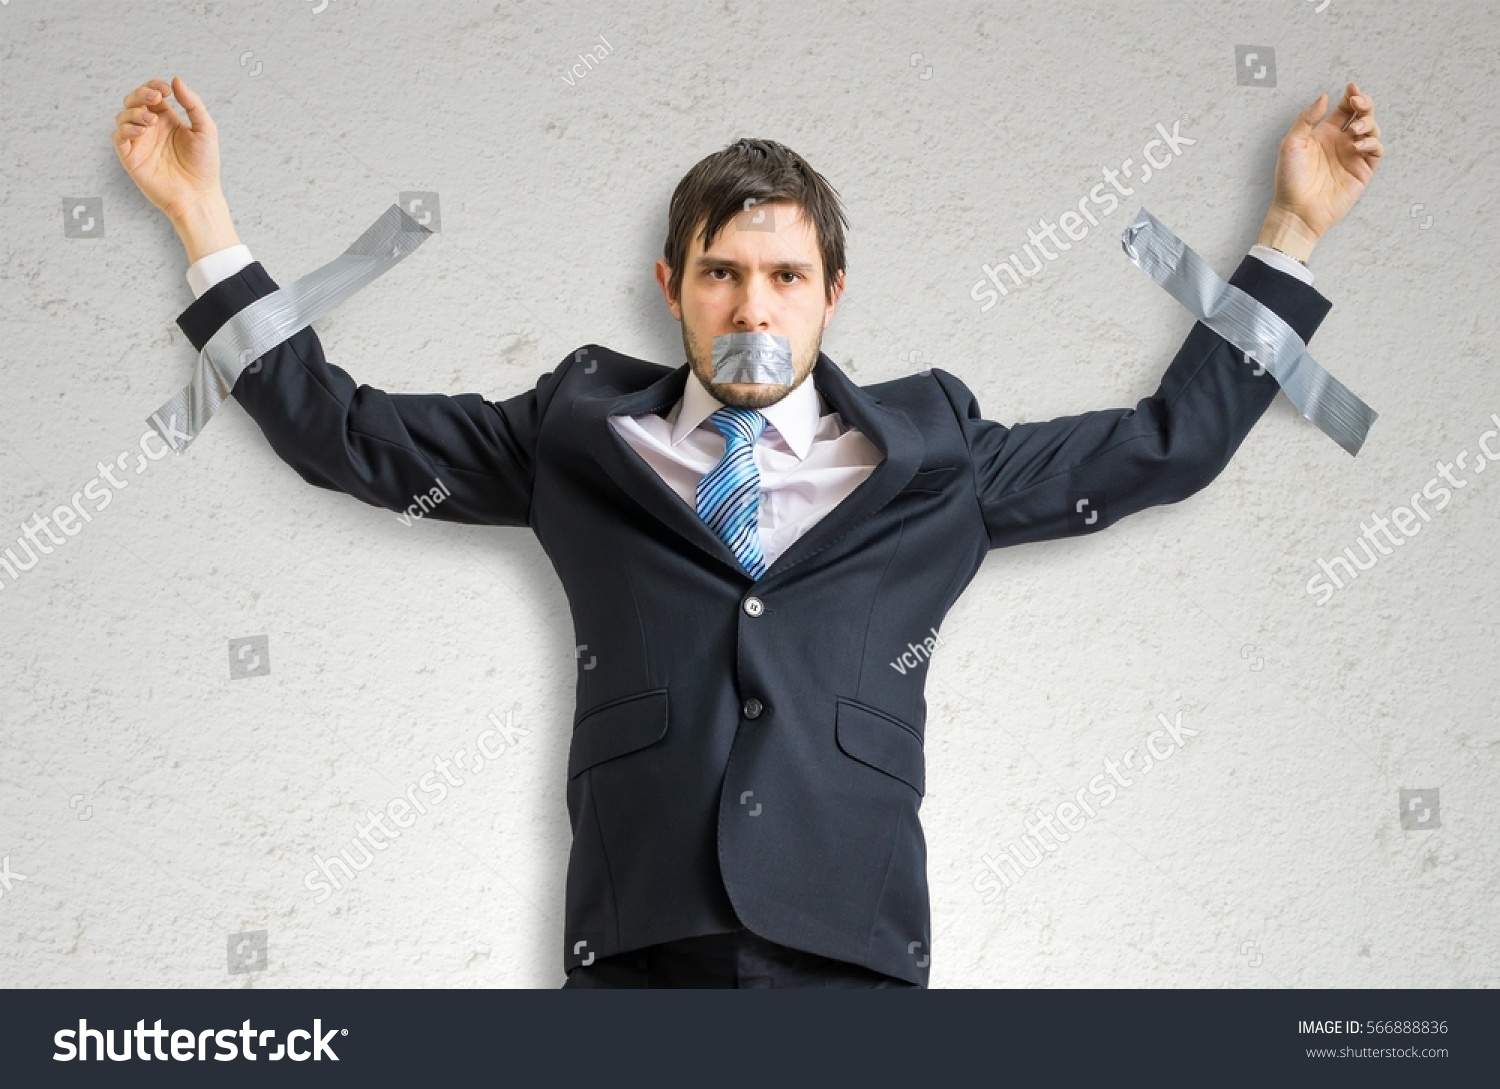 Businessman in suit is taped to the wall with adhesive tape. #566888836